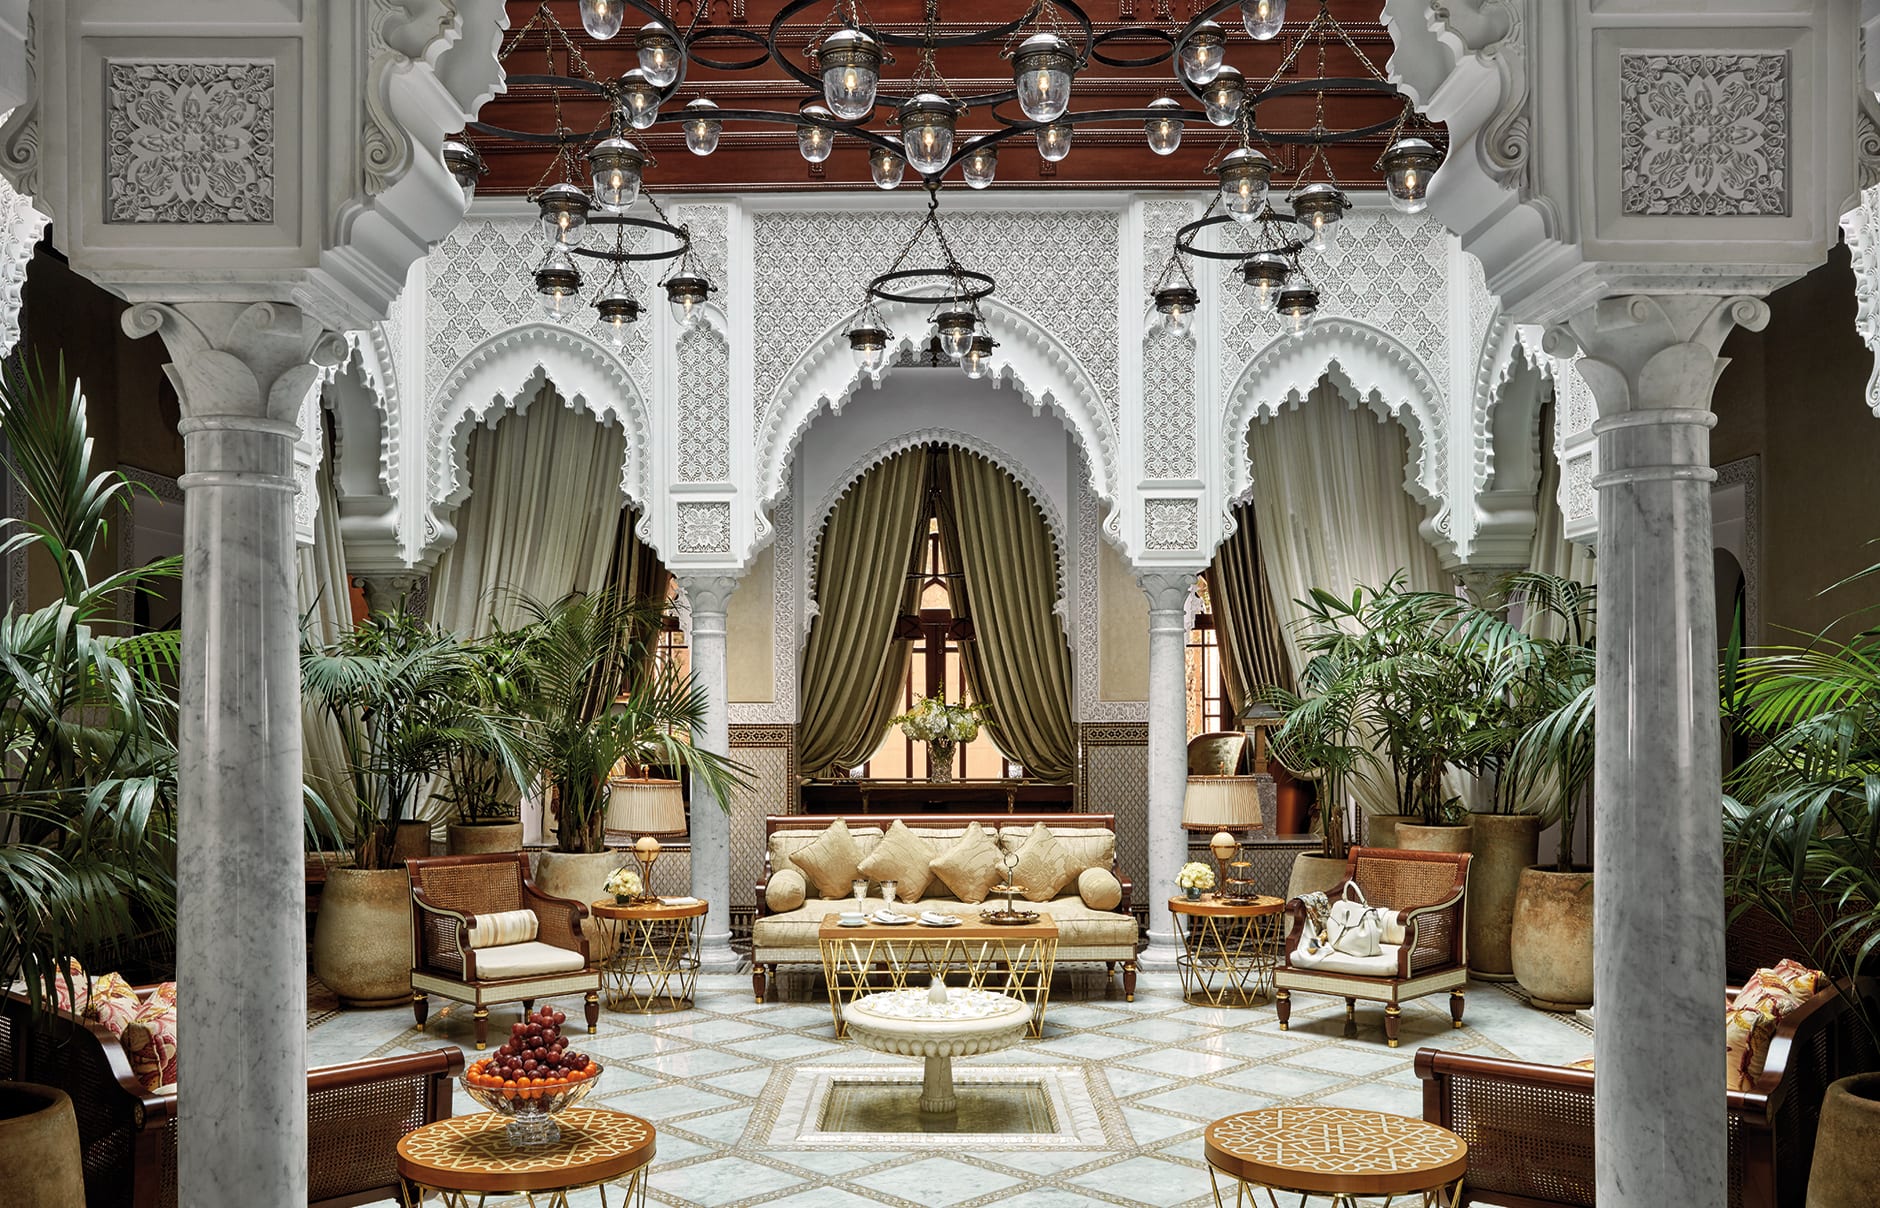 Royal Mansour Marrakech Morocco • Hotel Review By Travelplusstyle